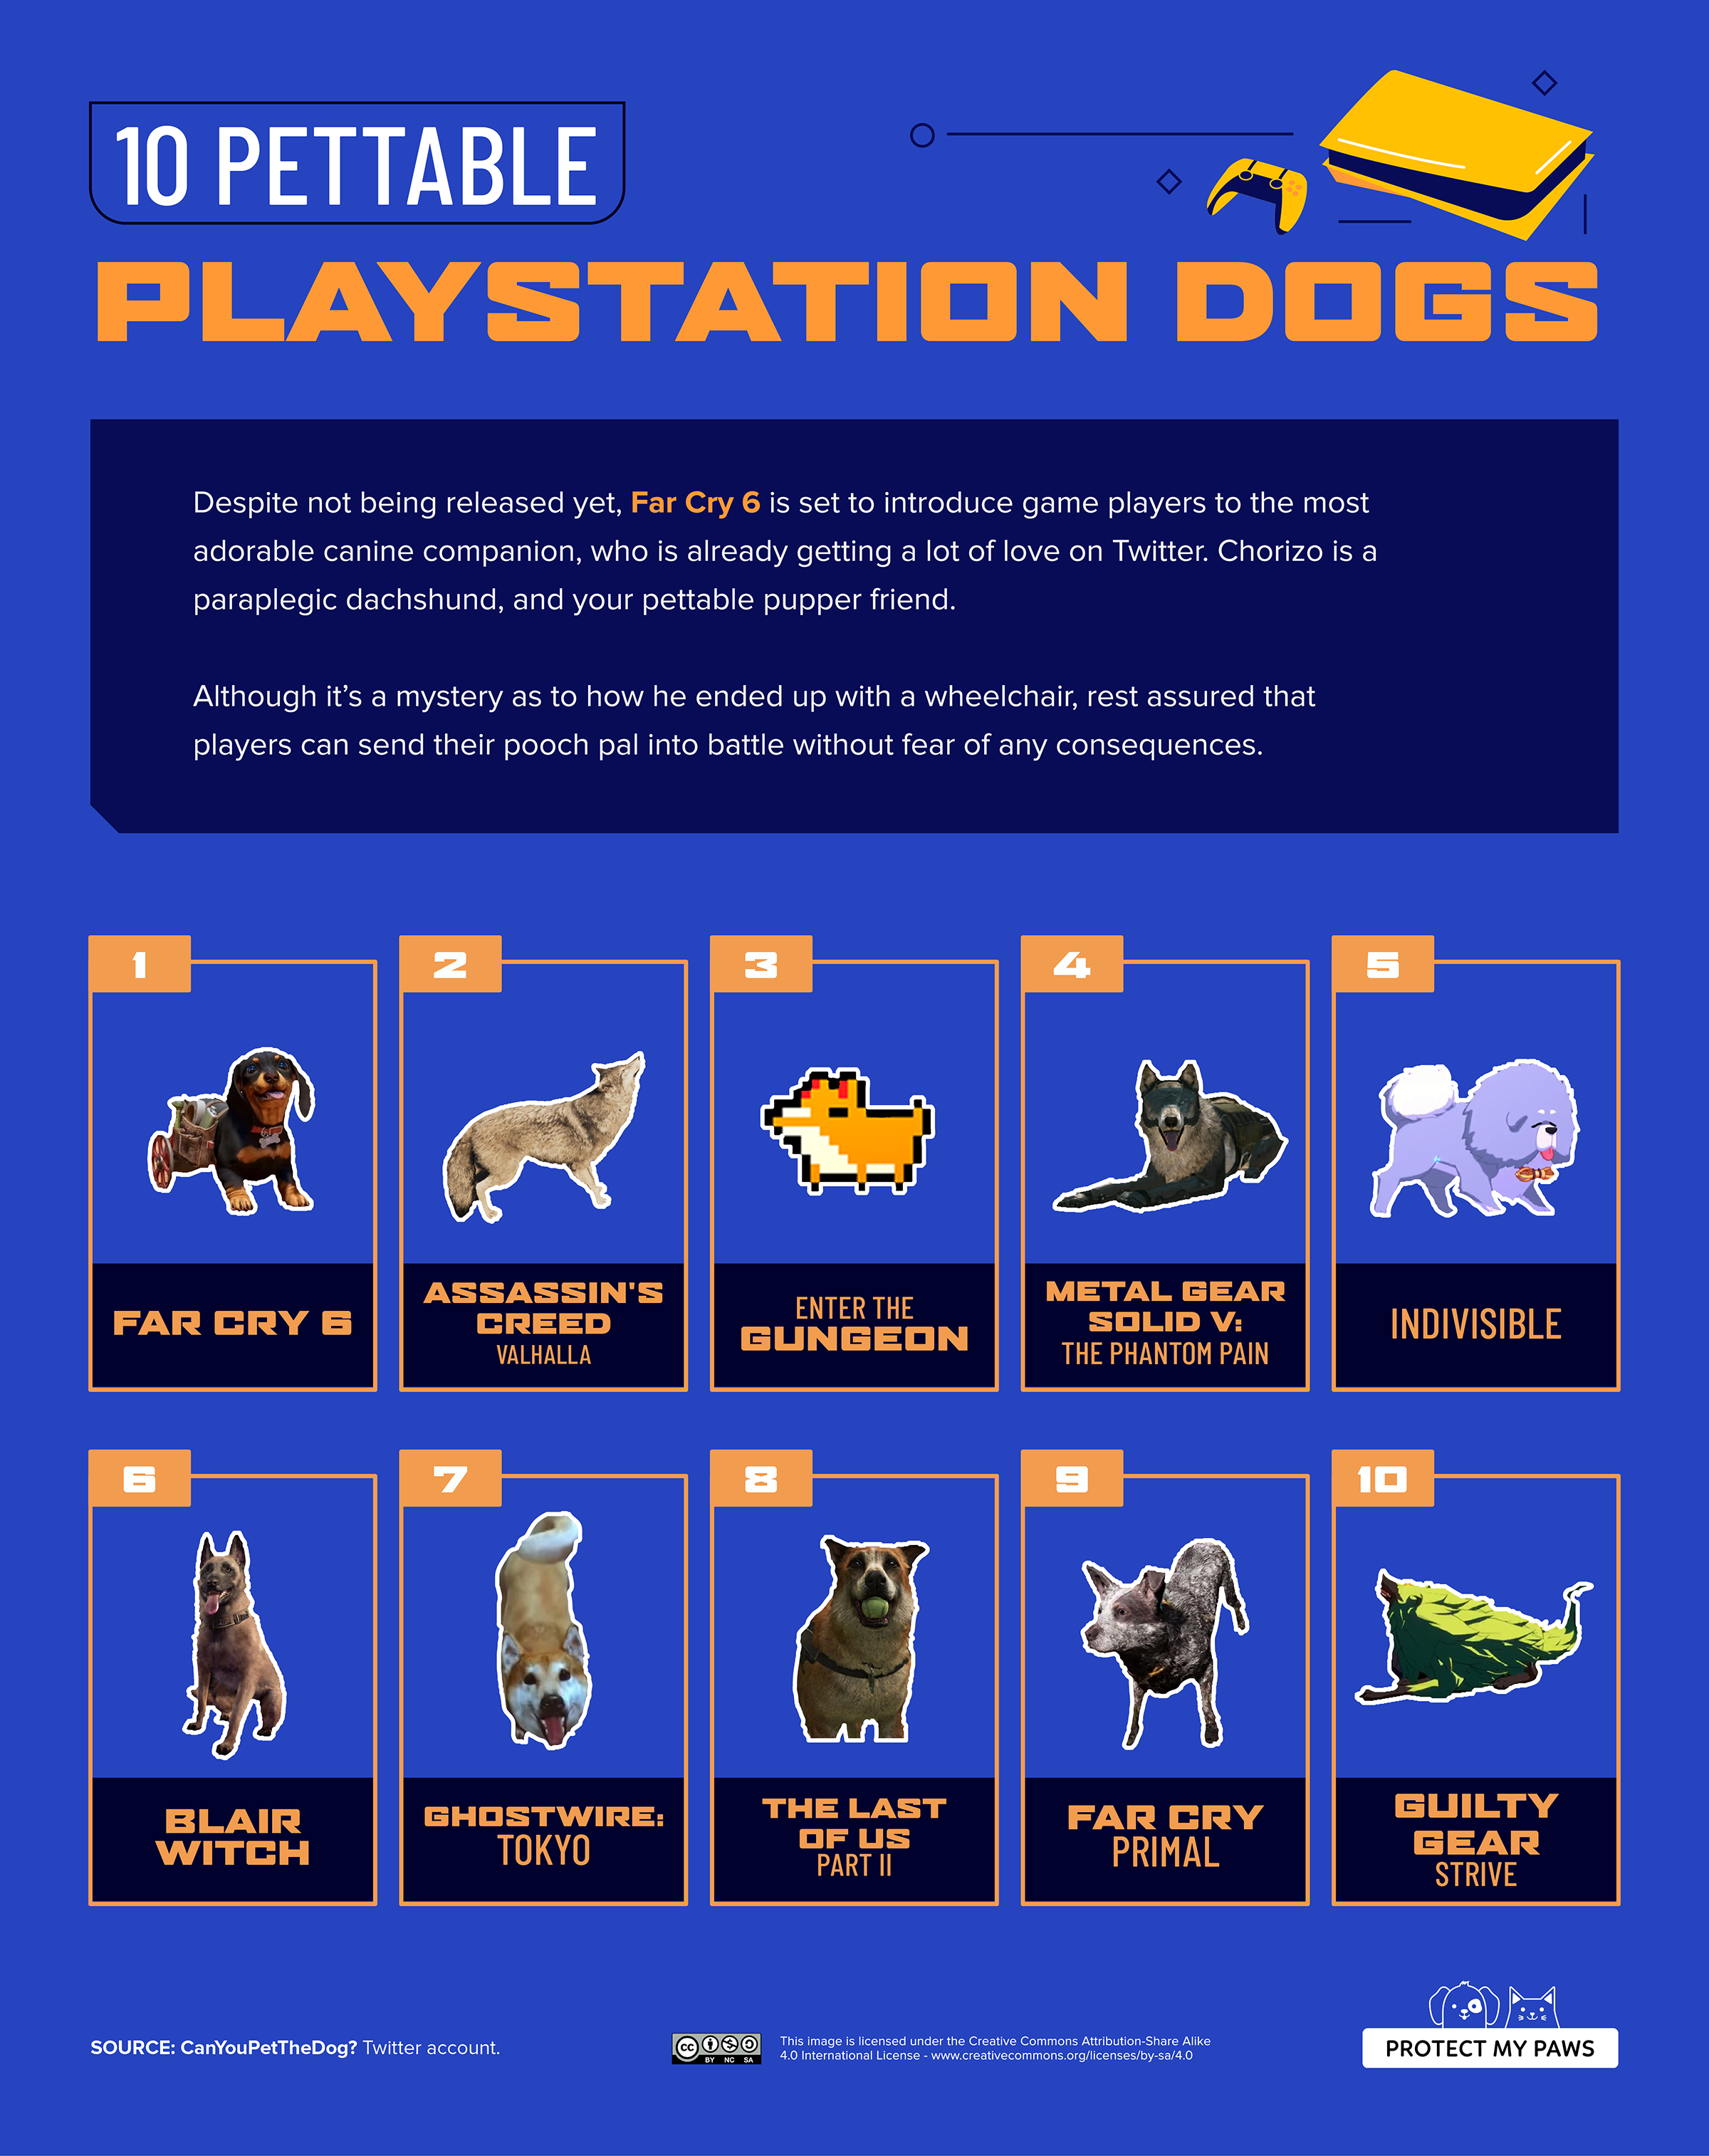 04_Video-Game-Dogs_Static_Pettable-Playstation-Dogs